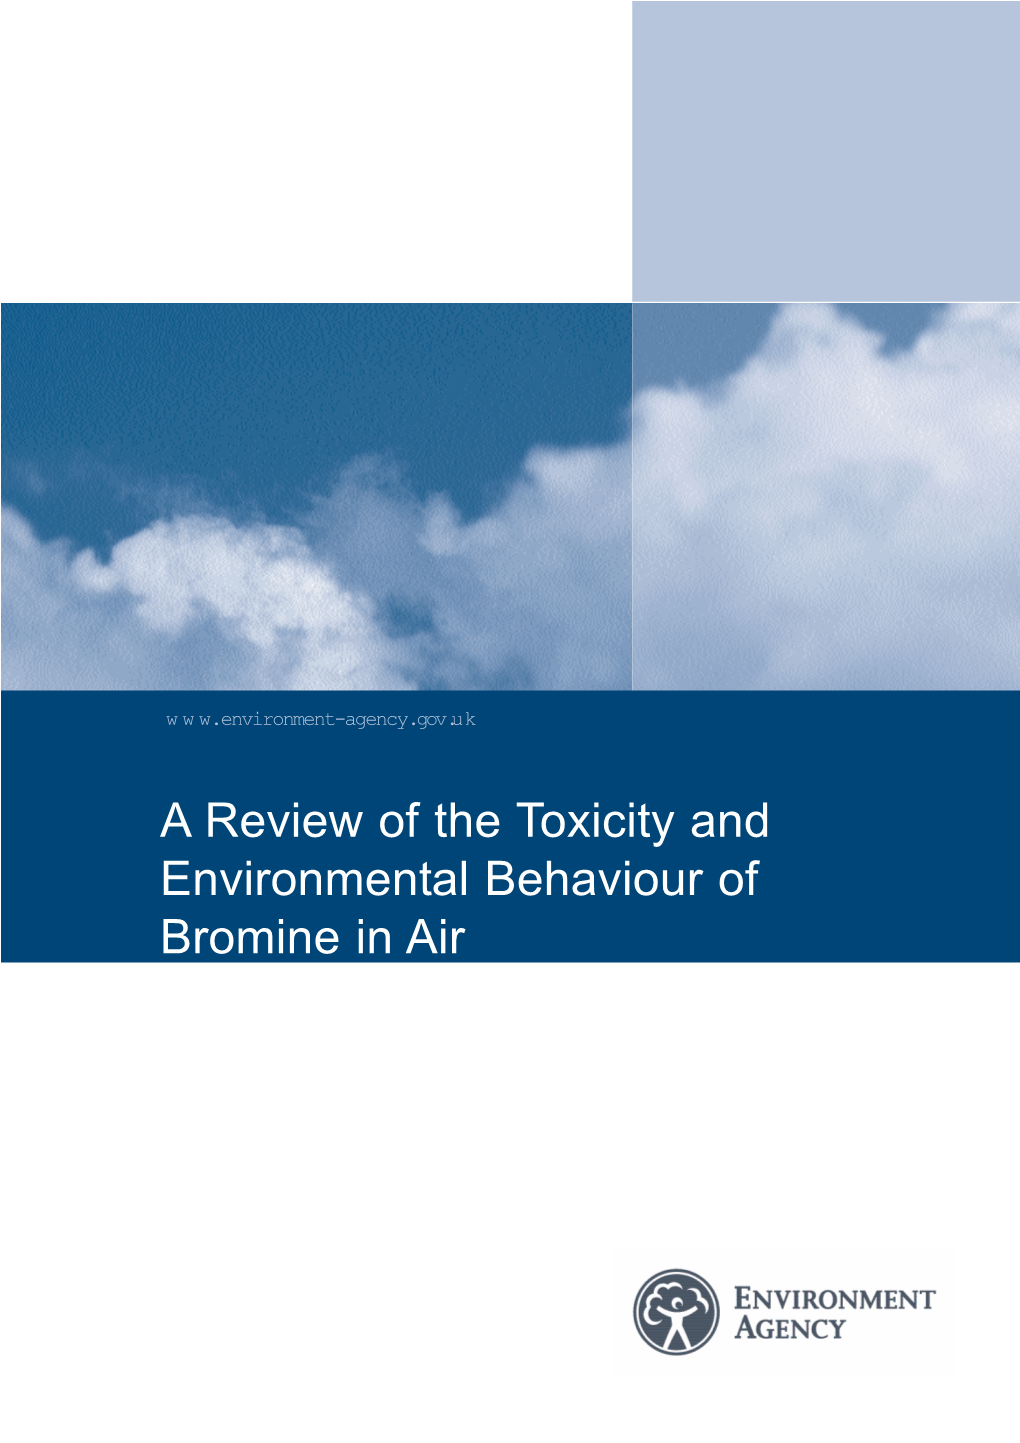 A Review of the Toxicity and Environmental Behaviour